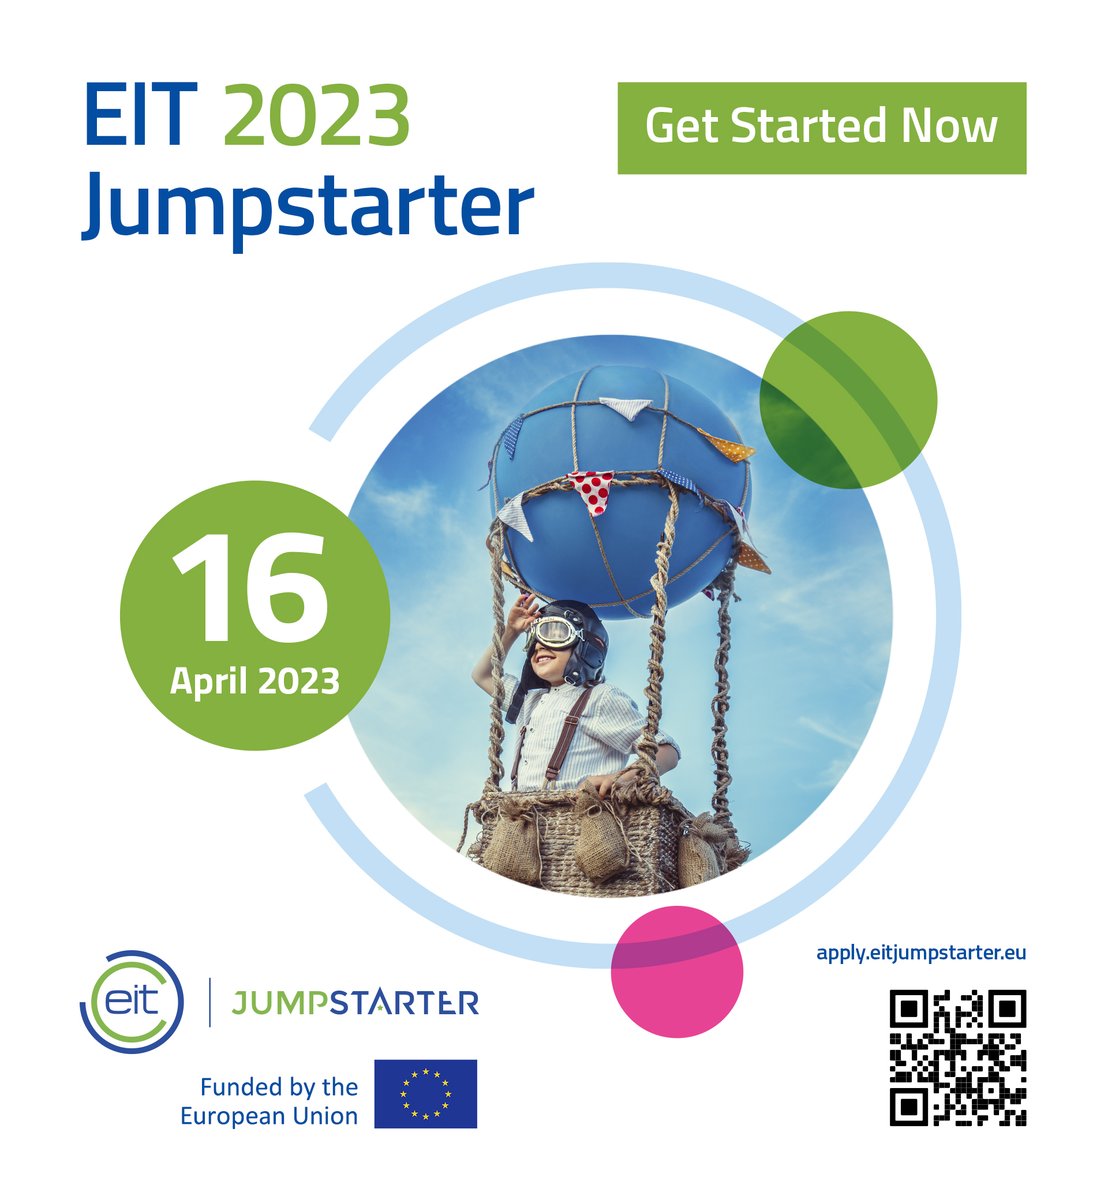 🚀#EITJUMPSTARTER 2023 – RECRUITMENT IS OPEN 🚀

Do you have an innovative business idea in agriculture, food processing and distribution, healthcare, energy, raw materials, urban mobility or the manufacturing sector and want to learn basic entrepreneurial skills?

@EITeu